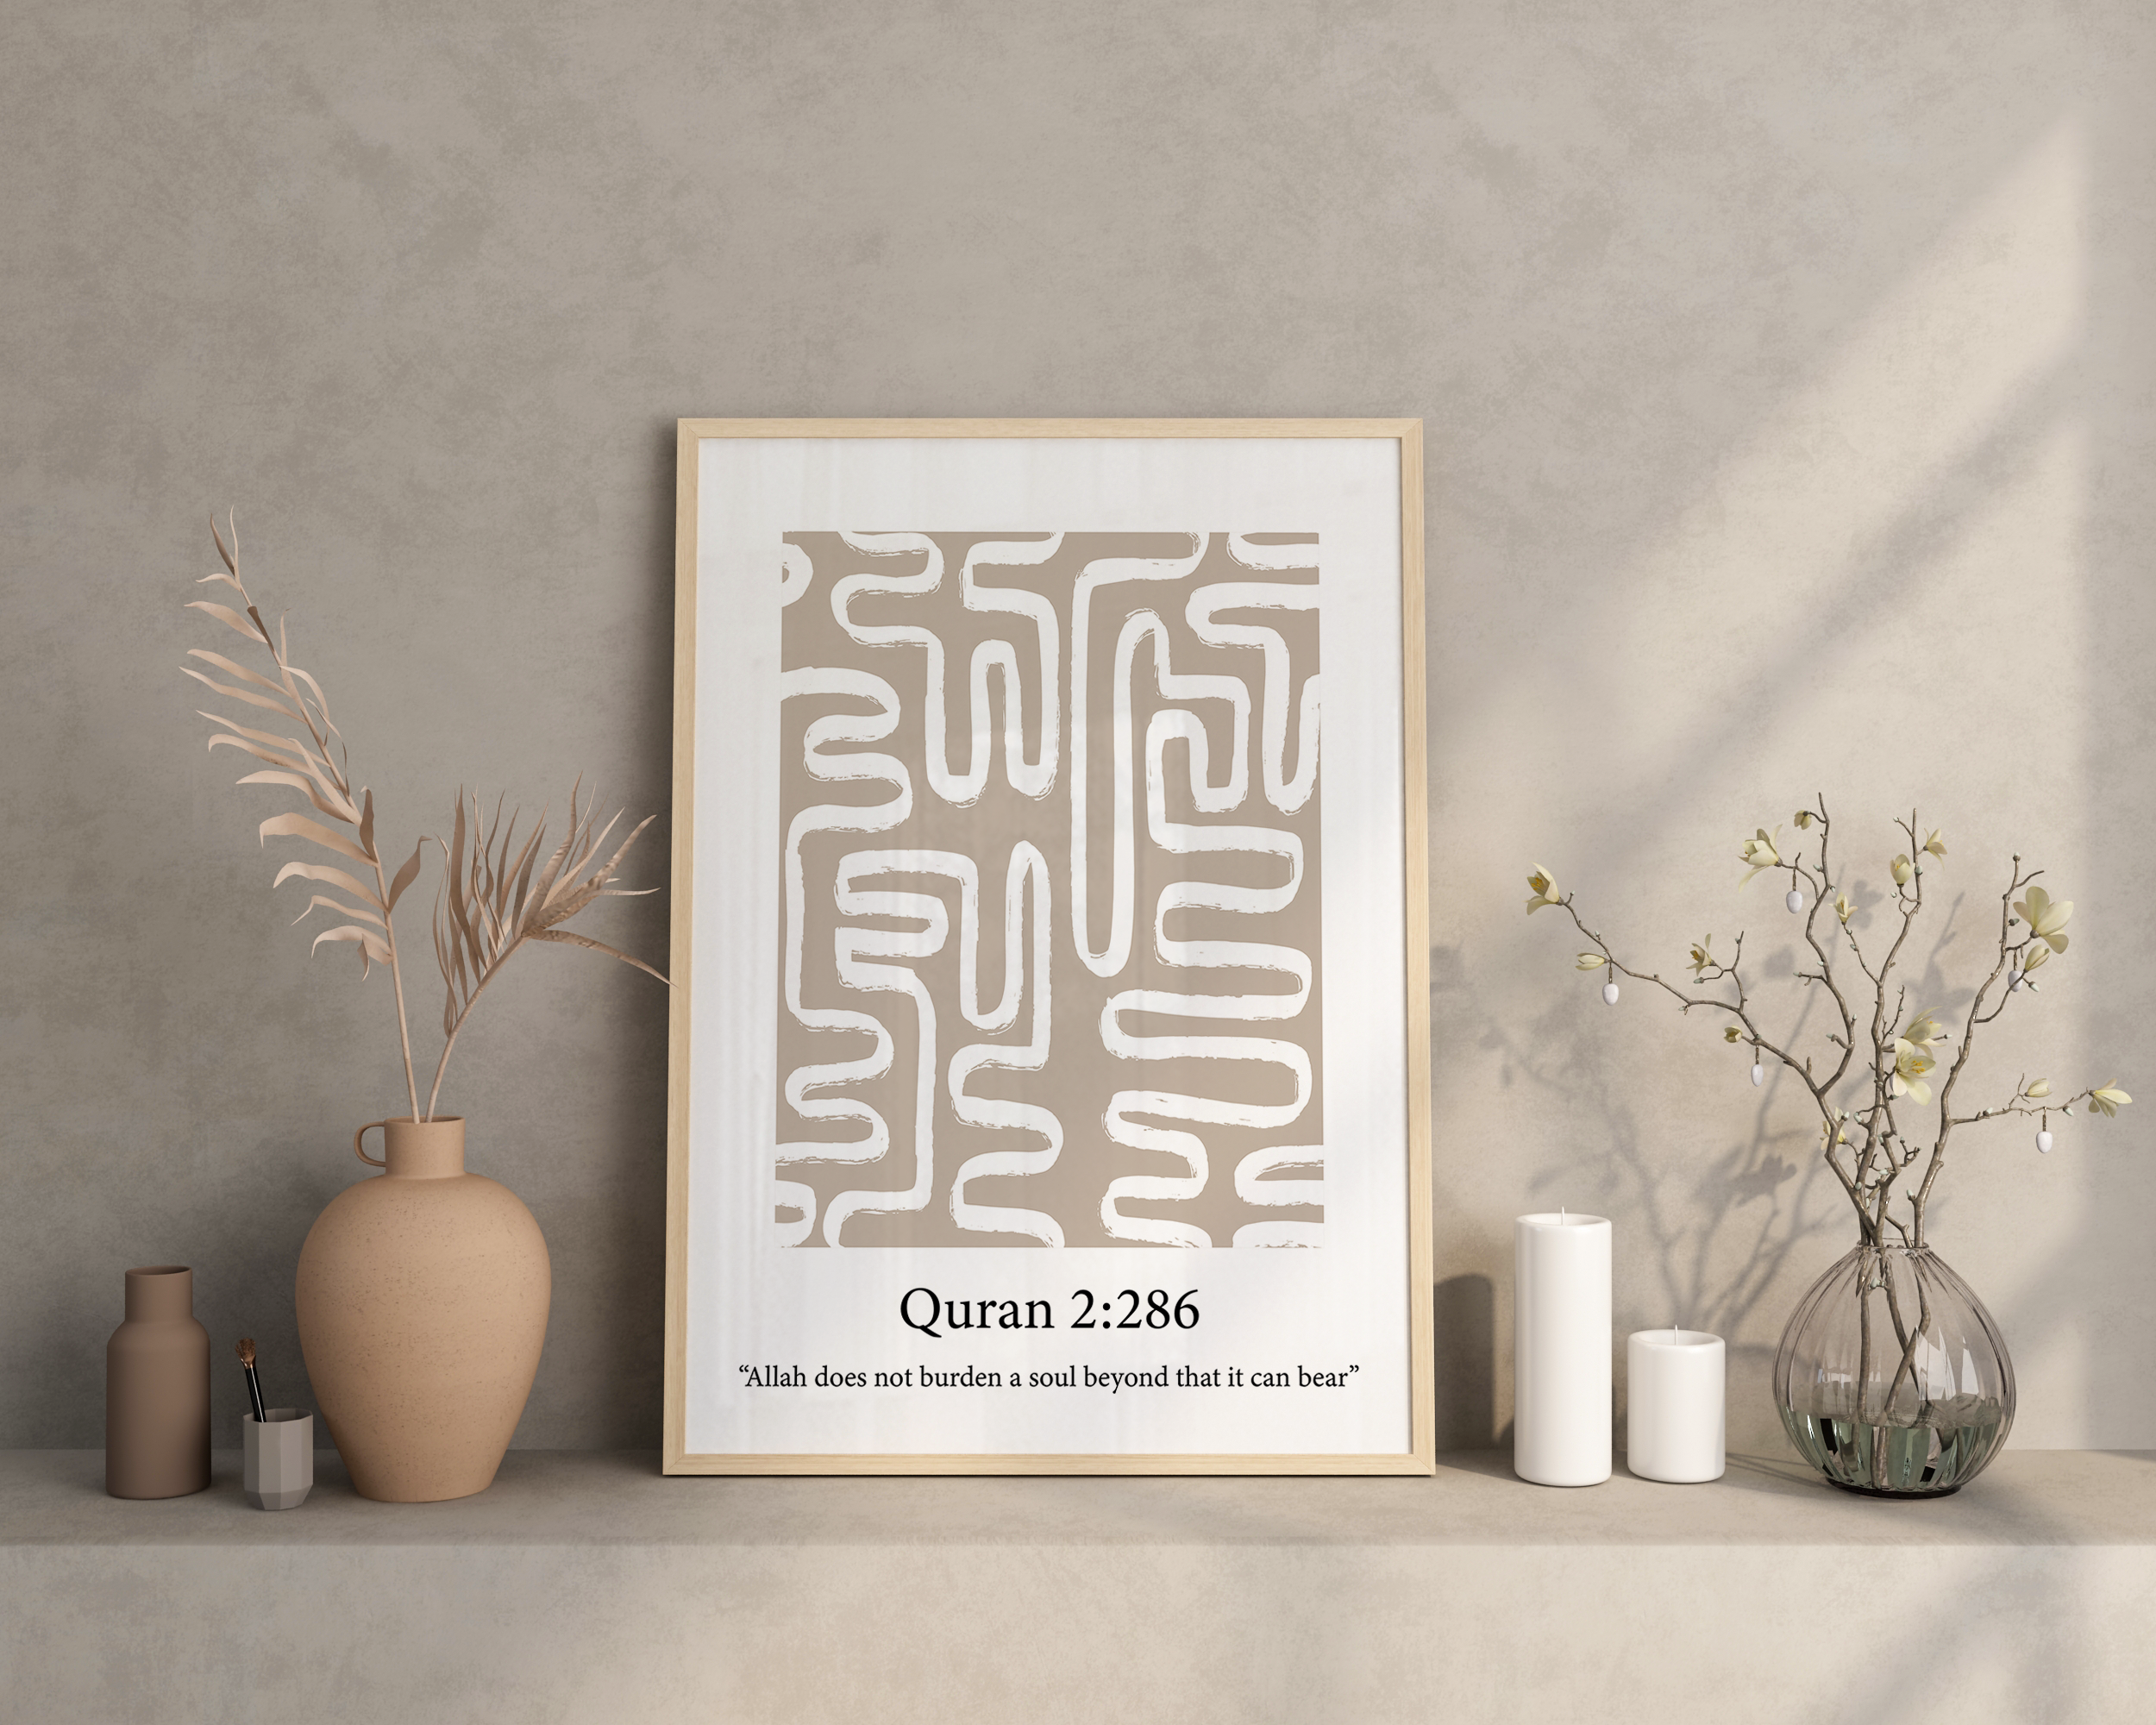 “Allah does not burden a soul beyond that it can bear” - Islamic Quote Wall Art